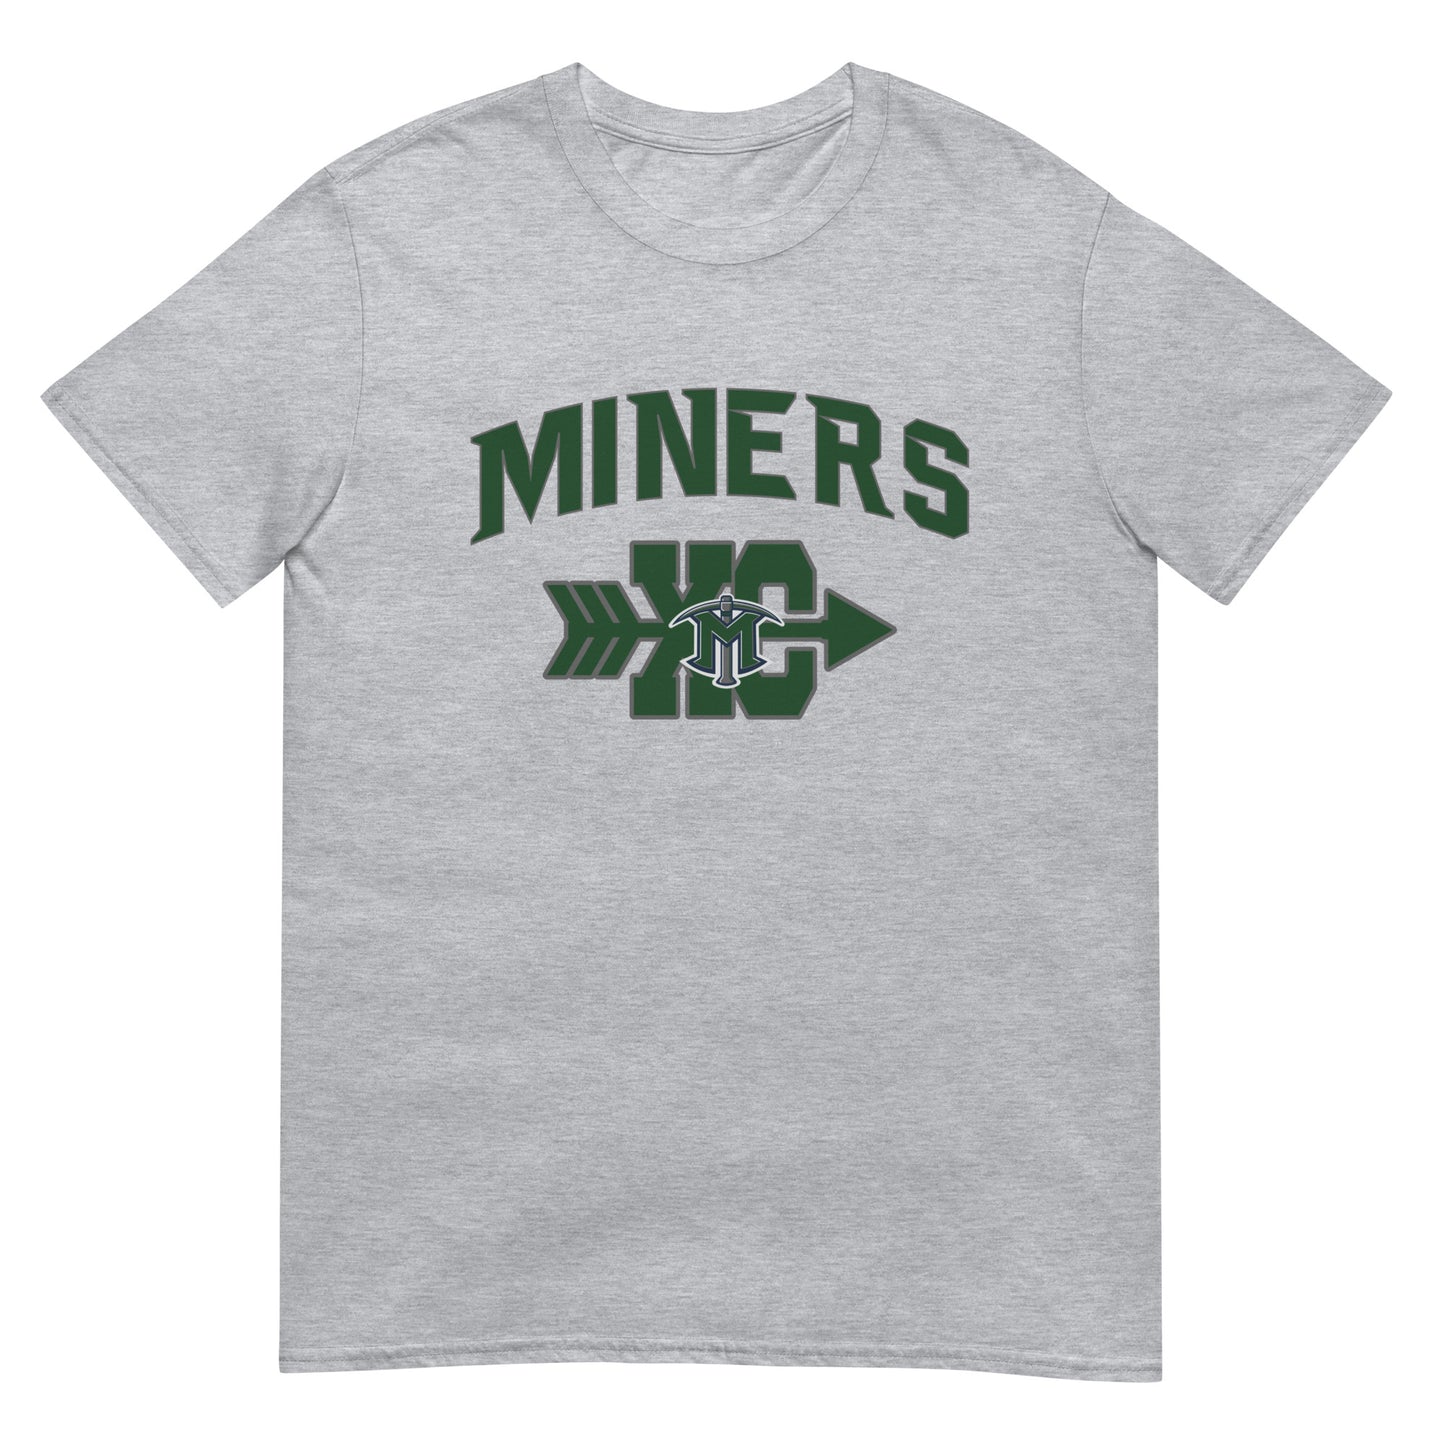 Miners Cross Country Short-Sleeve Unisex T-Shirt